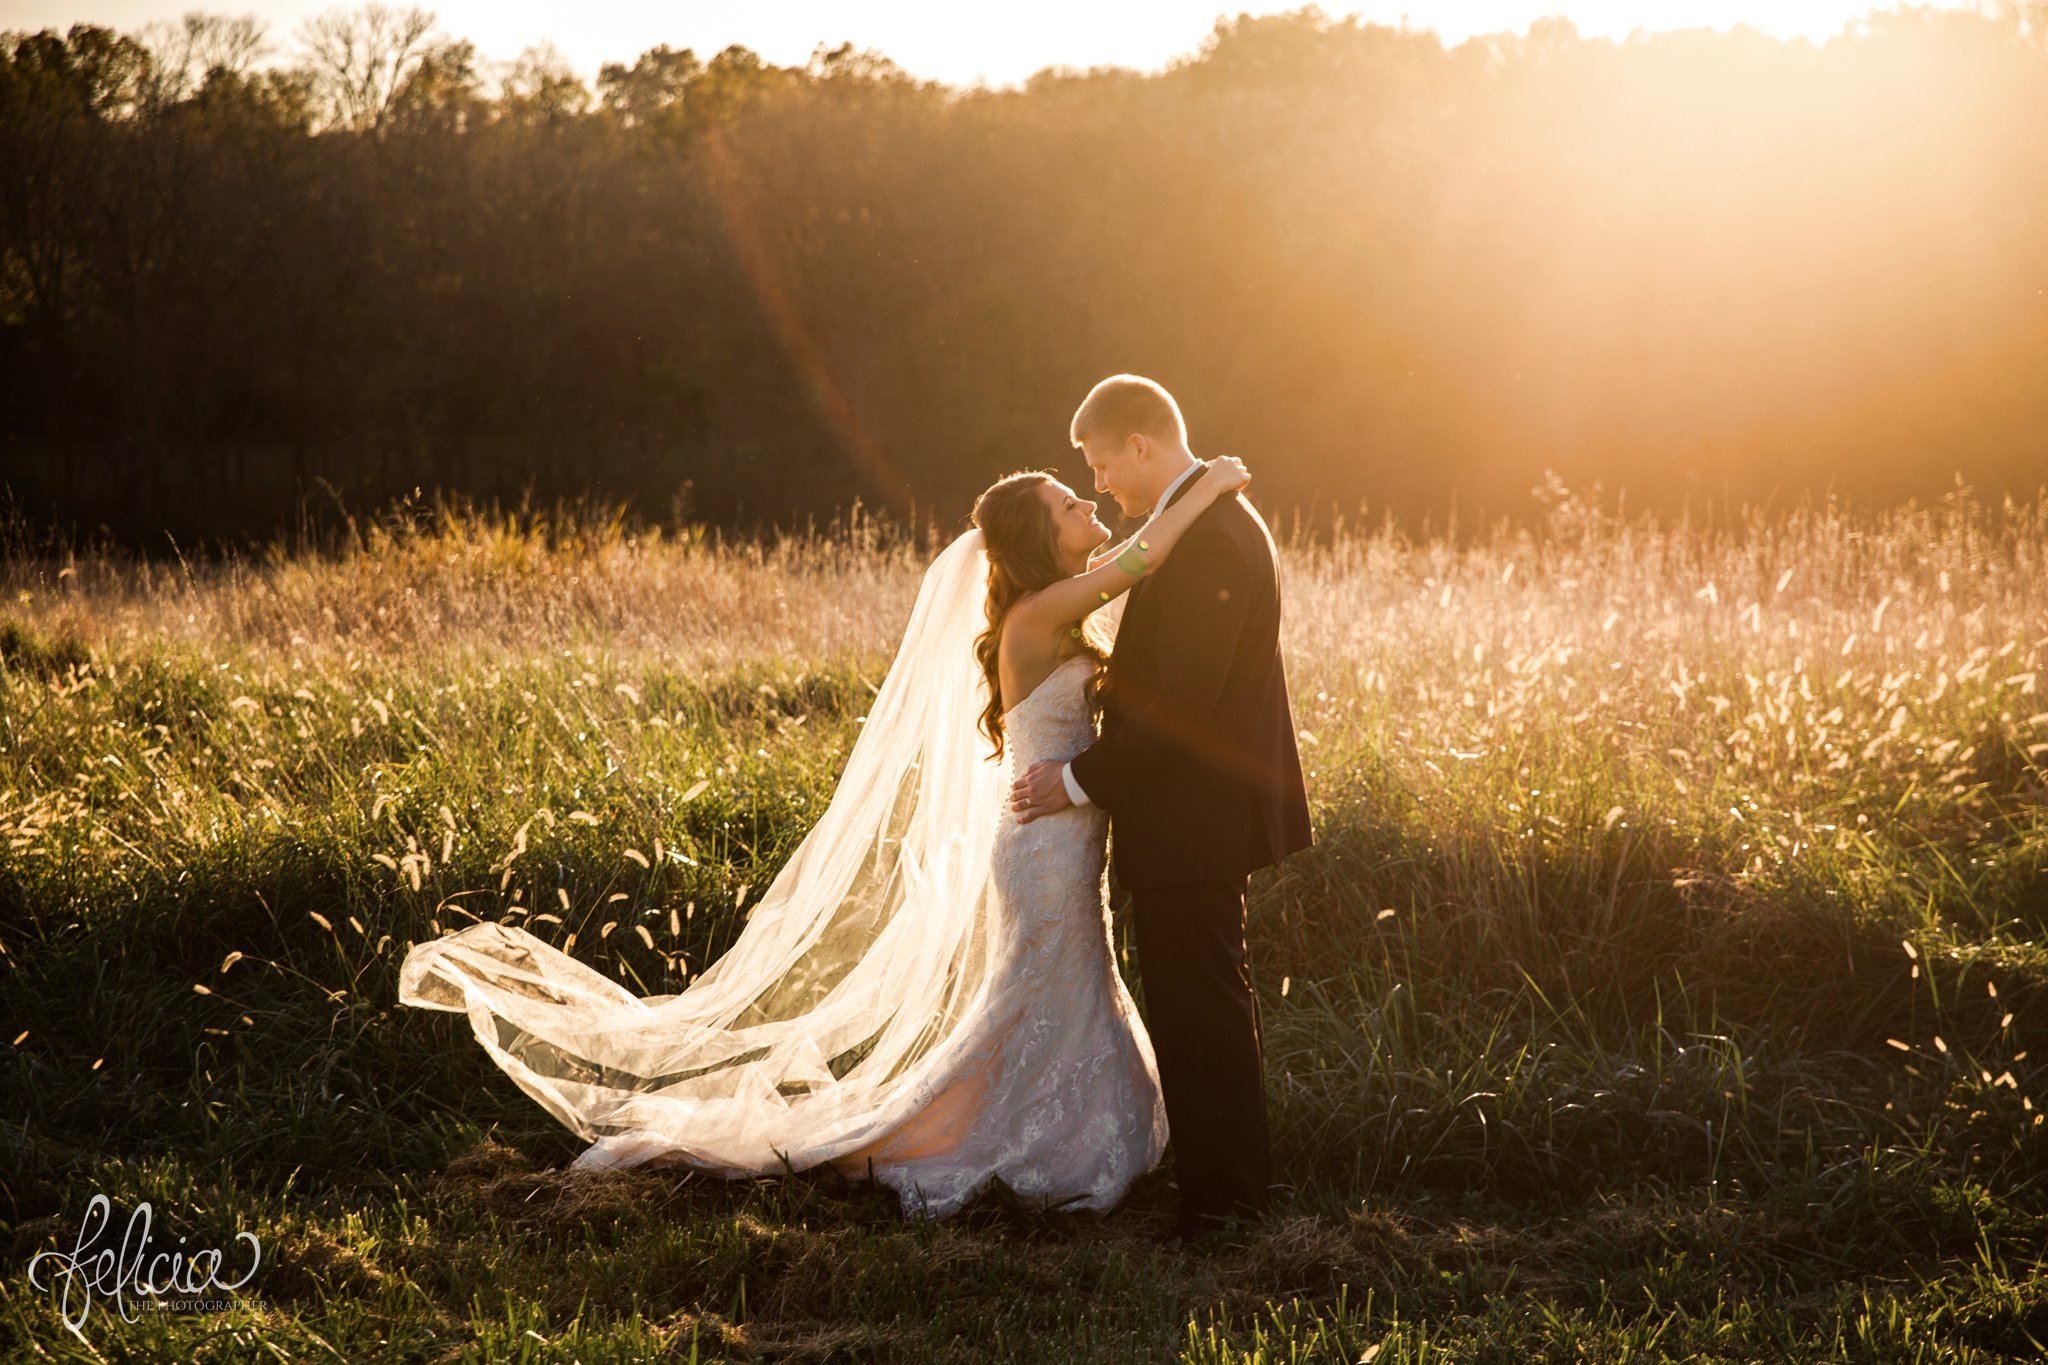 wedding | wedding photos | Rumely Event Space | wedding photography | images by feliciathephotographer.com | field background | nature | nose touch | bride and groom portrait | holding hands | smiling | romantic pose | romantic sun | sun flare | embrace 